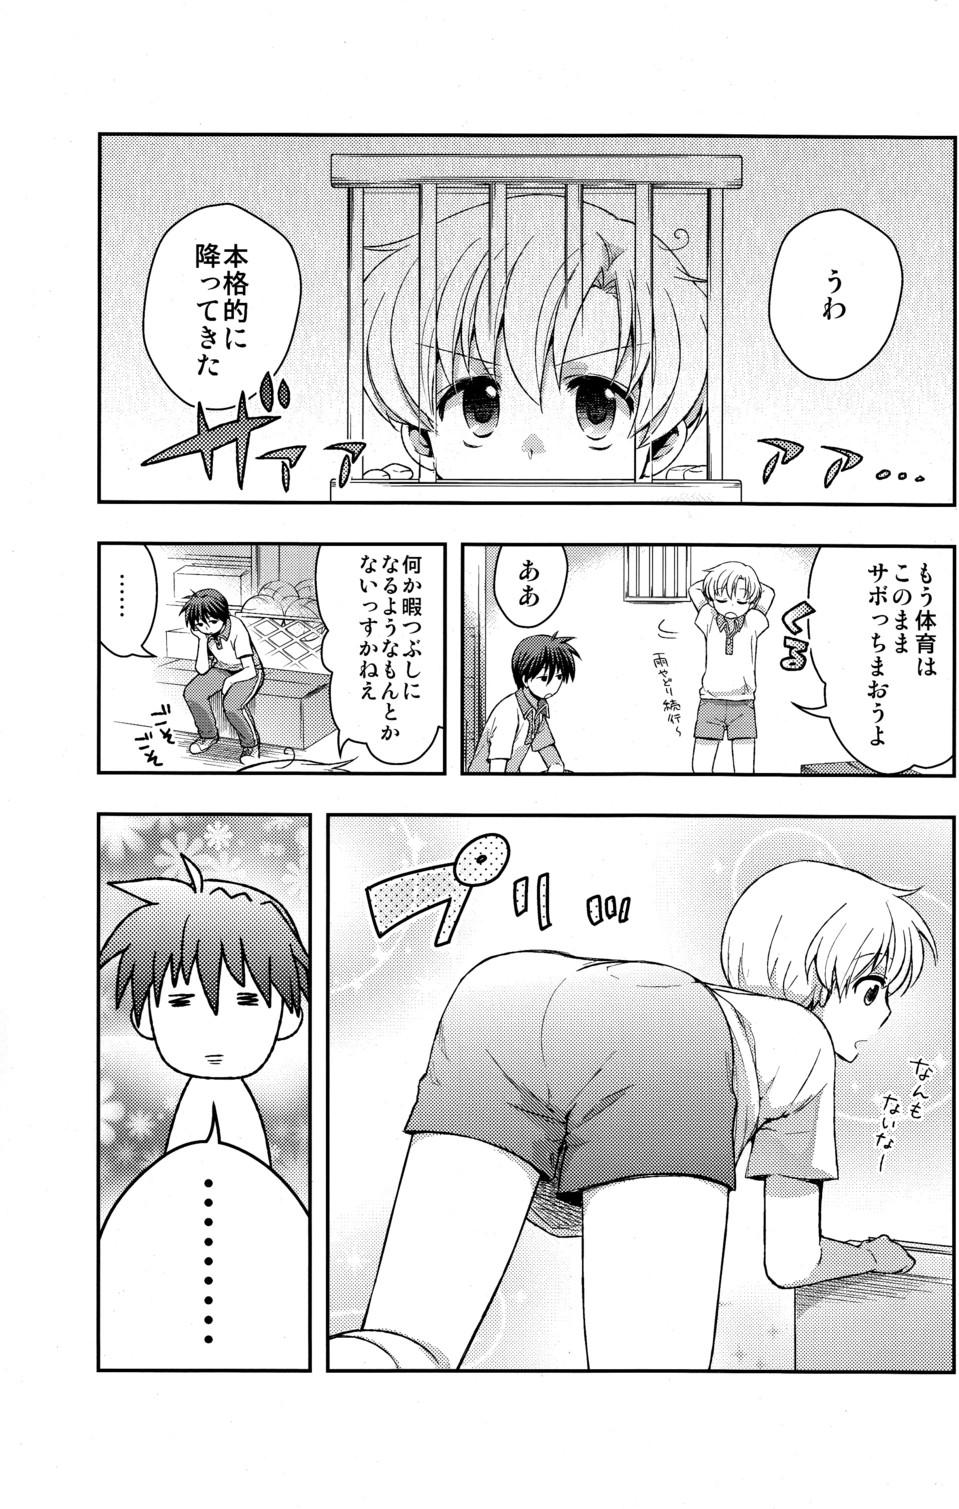 Style Sunohara Mania 4 - Clannad Yanks Featured - Page 7